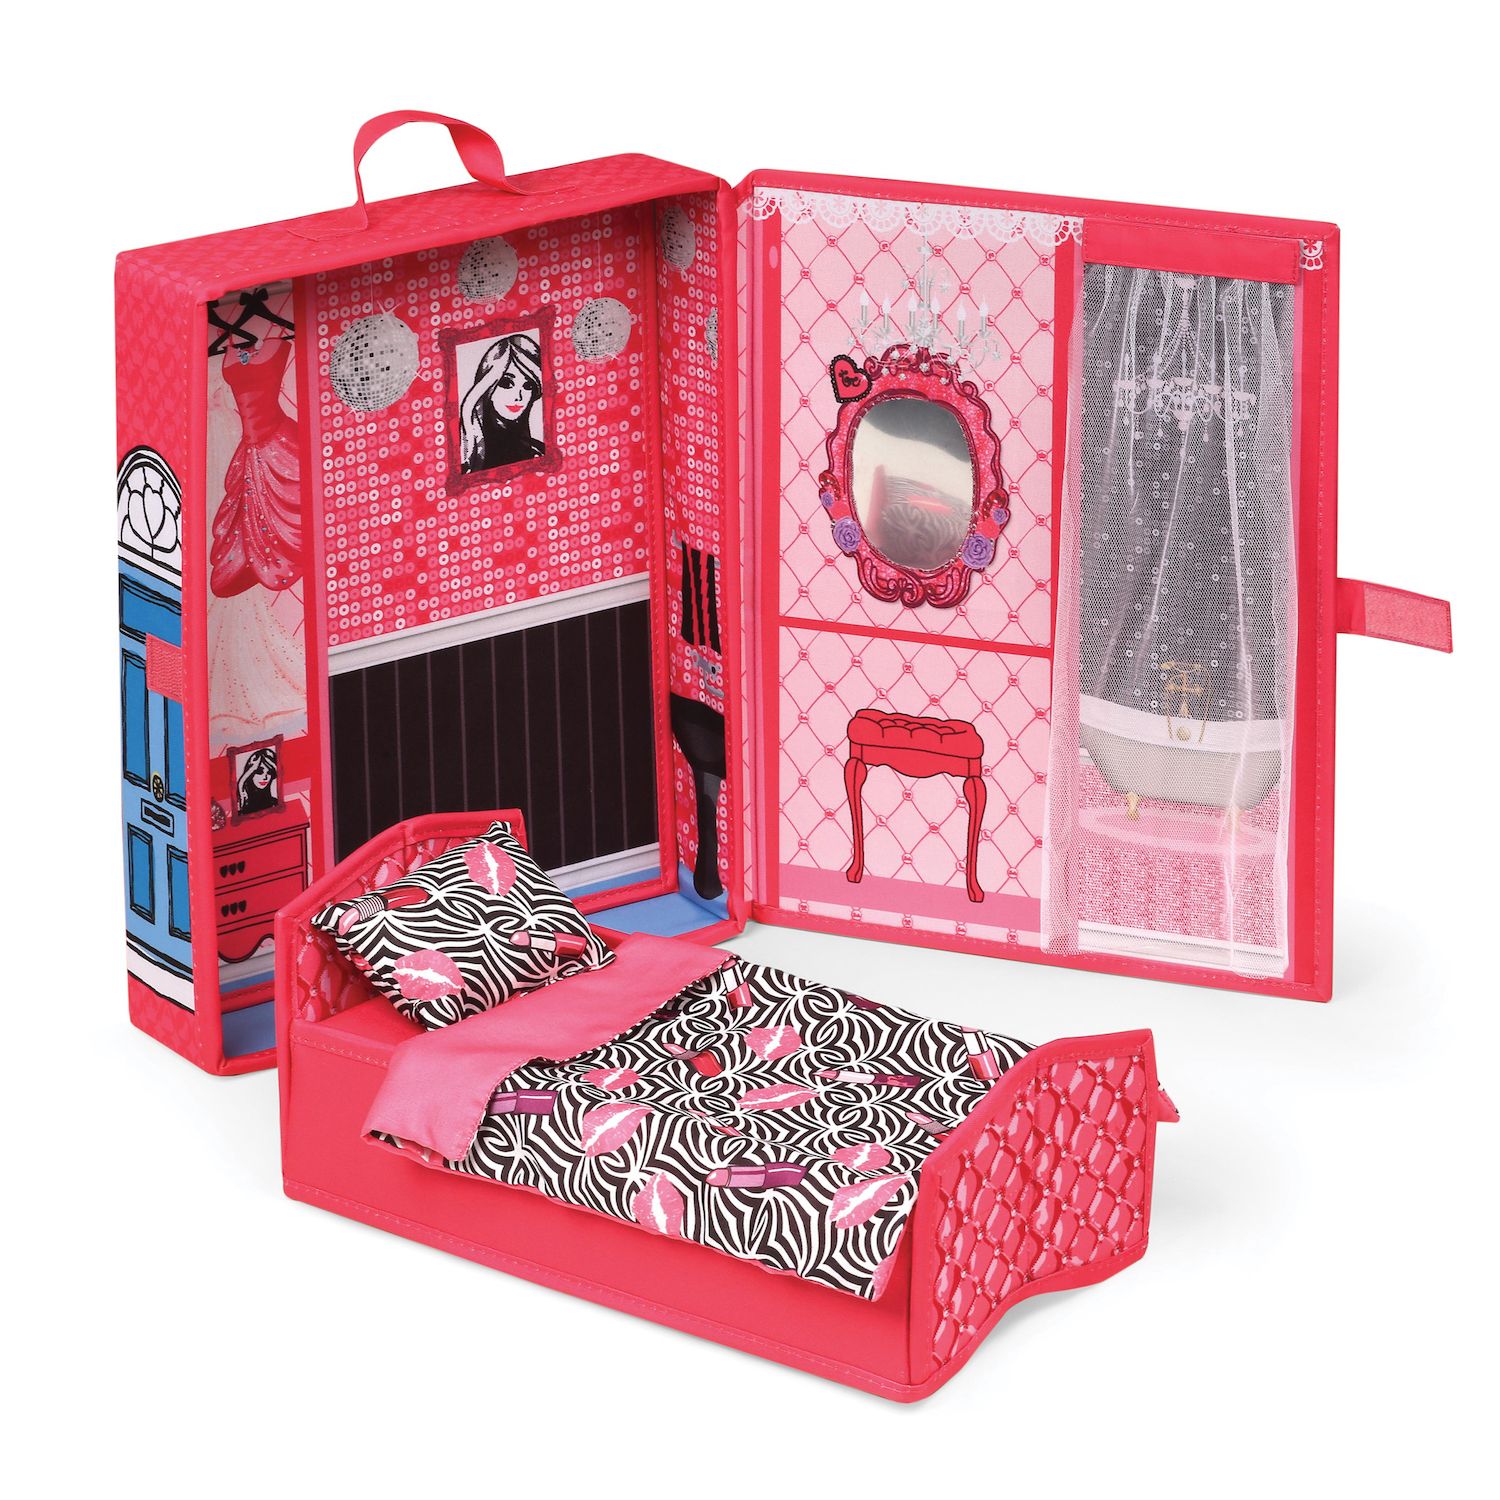 12 inch doll bunk beds